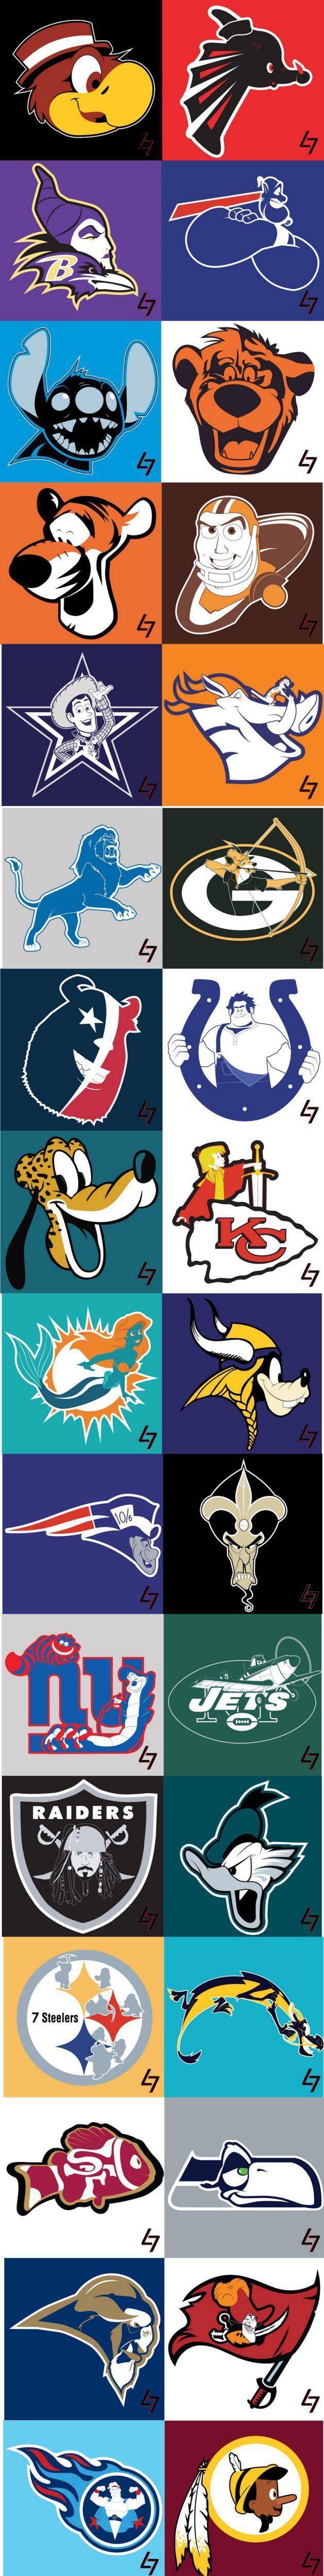 Disney Characters Logo - NFL logos with Disney characters